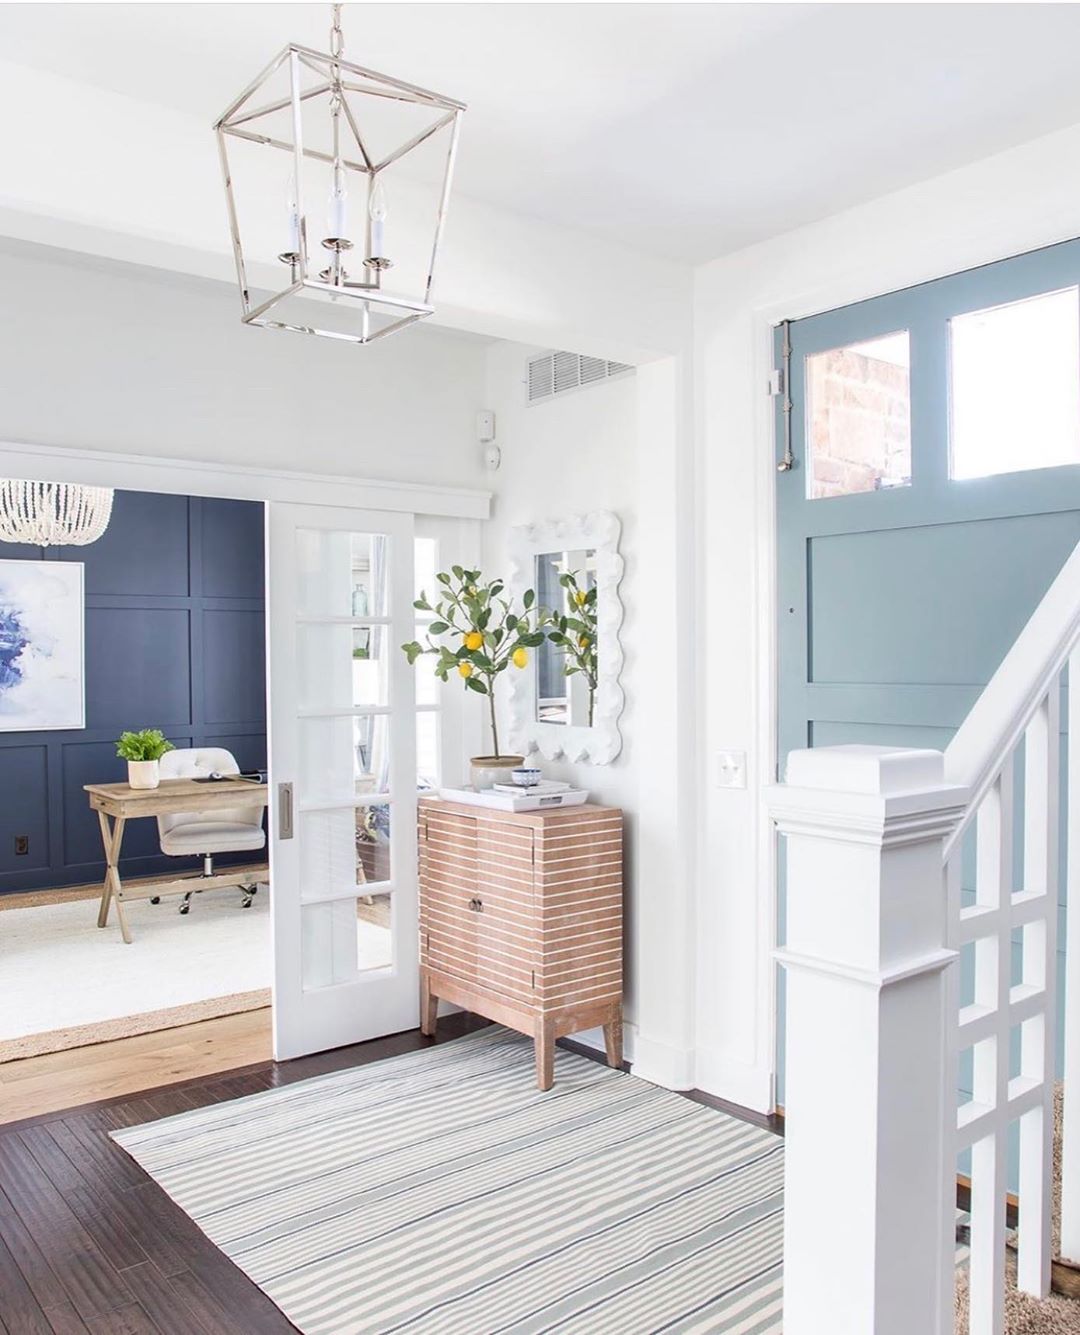 Entryway with white and light blue design. Photo by Instagram user @kathykuohome